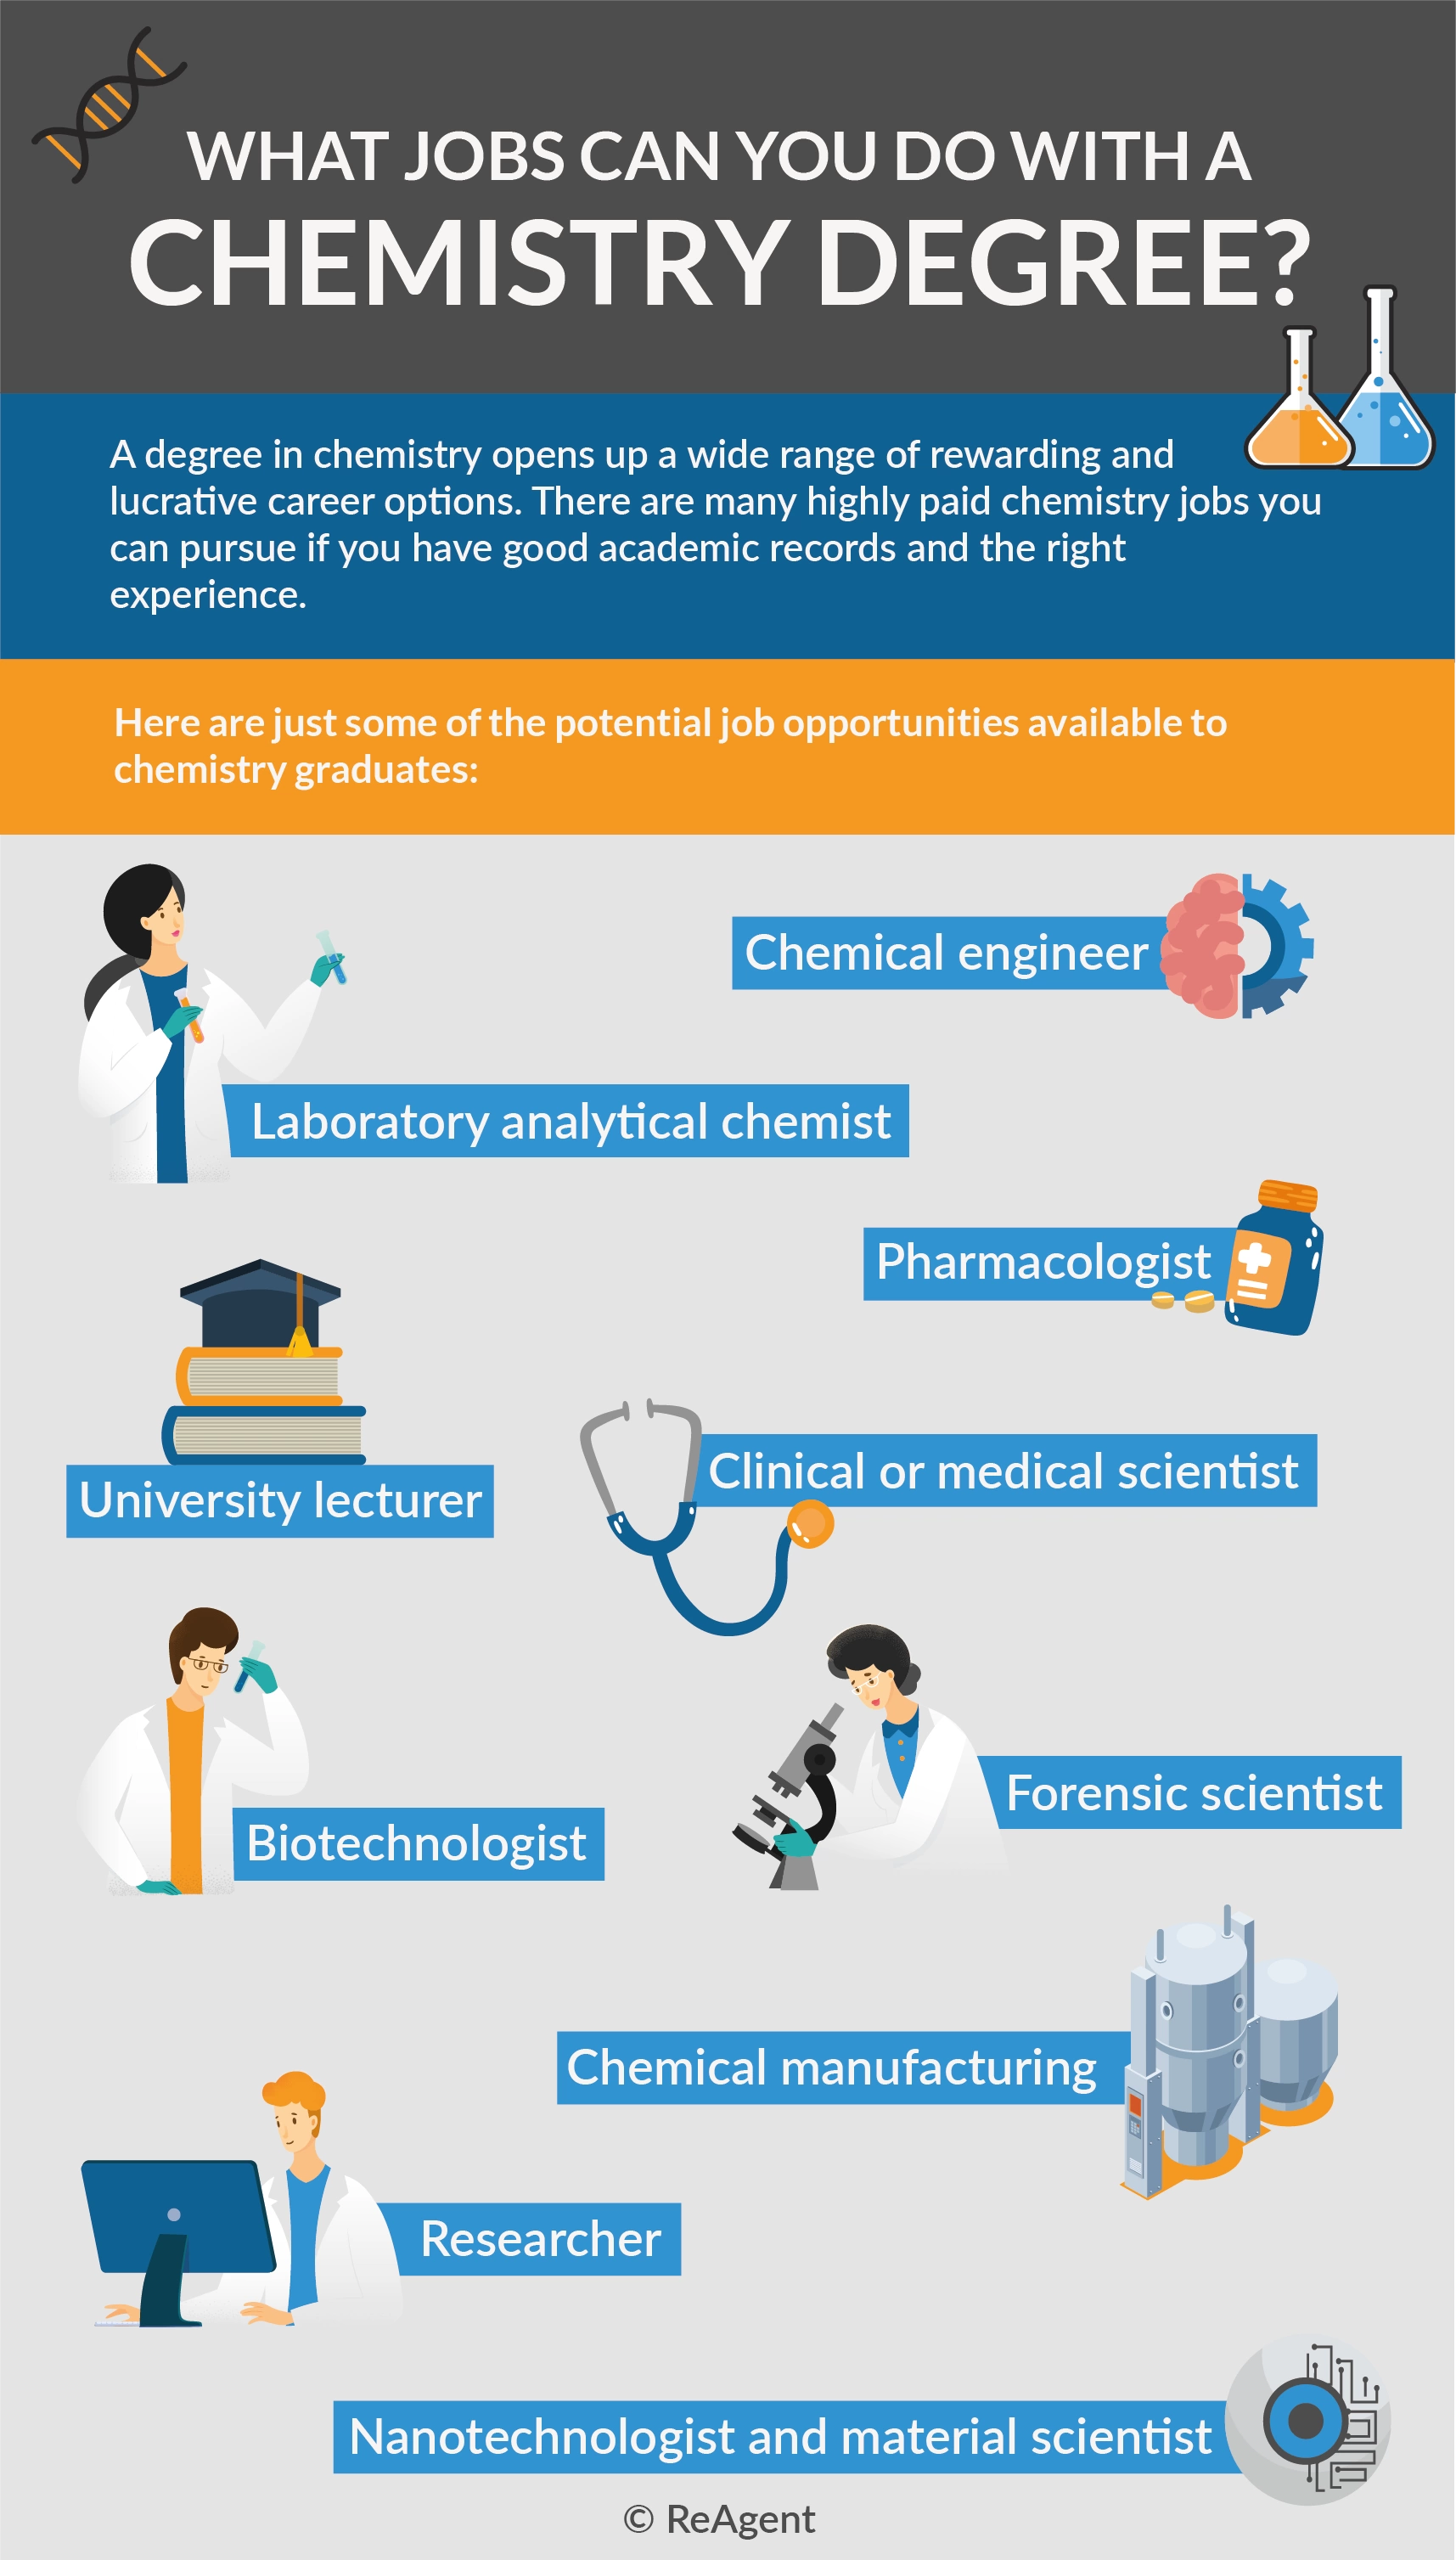 jobs-you-can-do-with-a-chemistry-degree-1